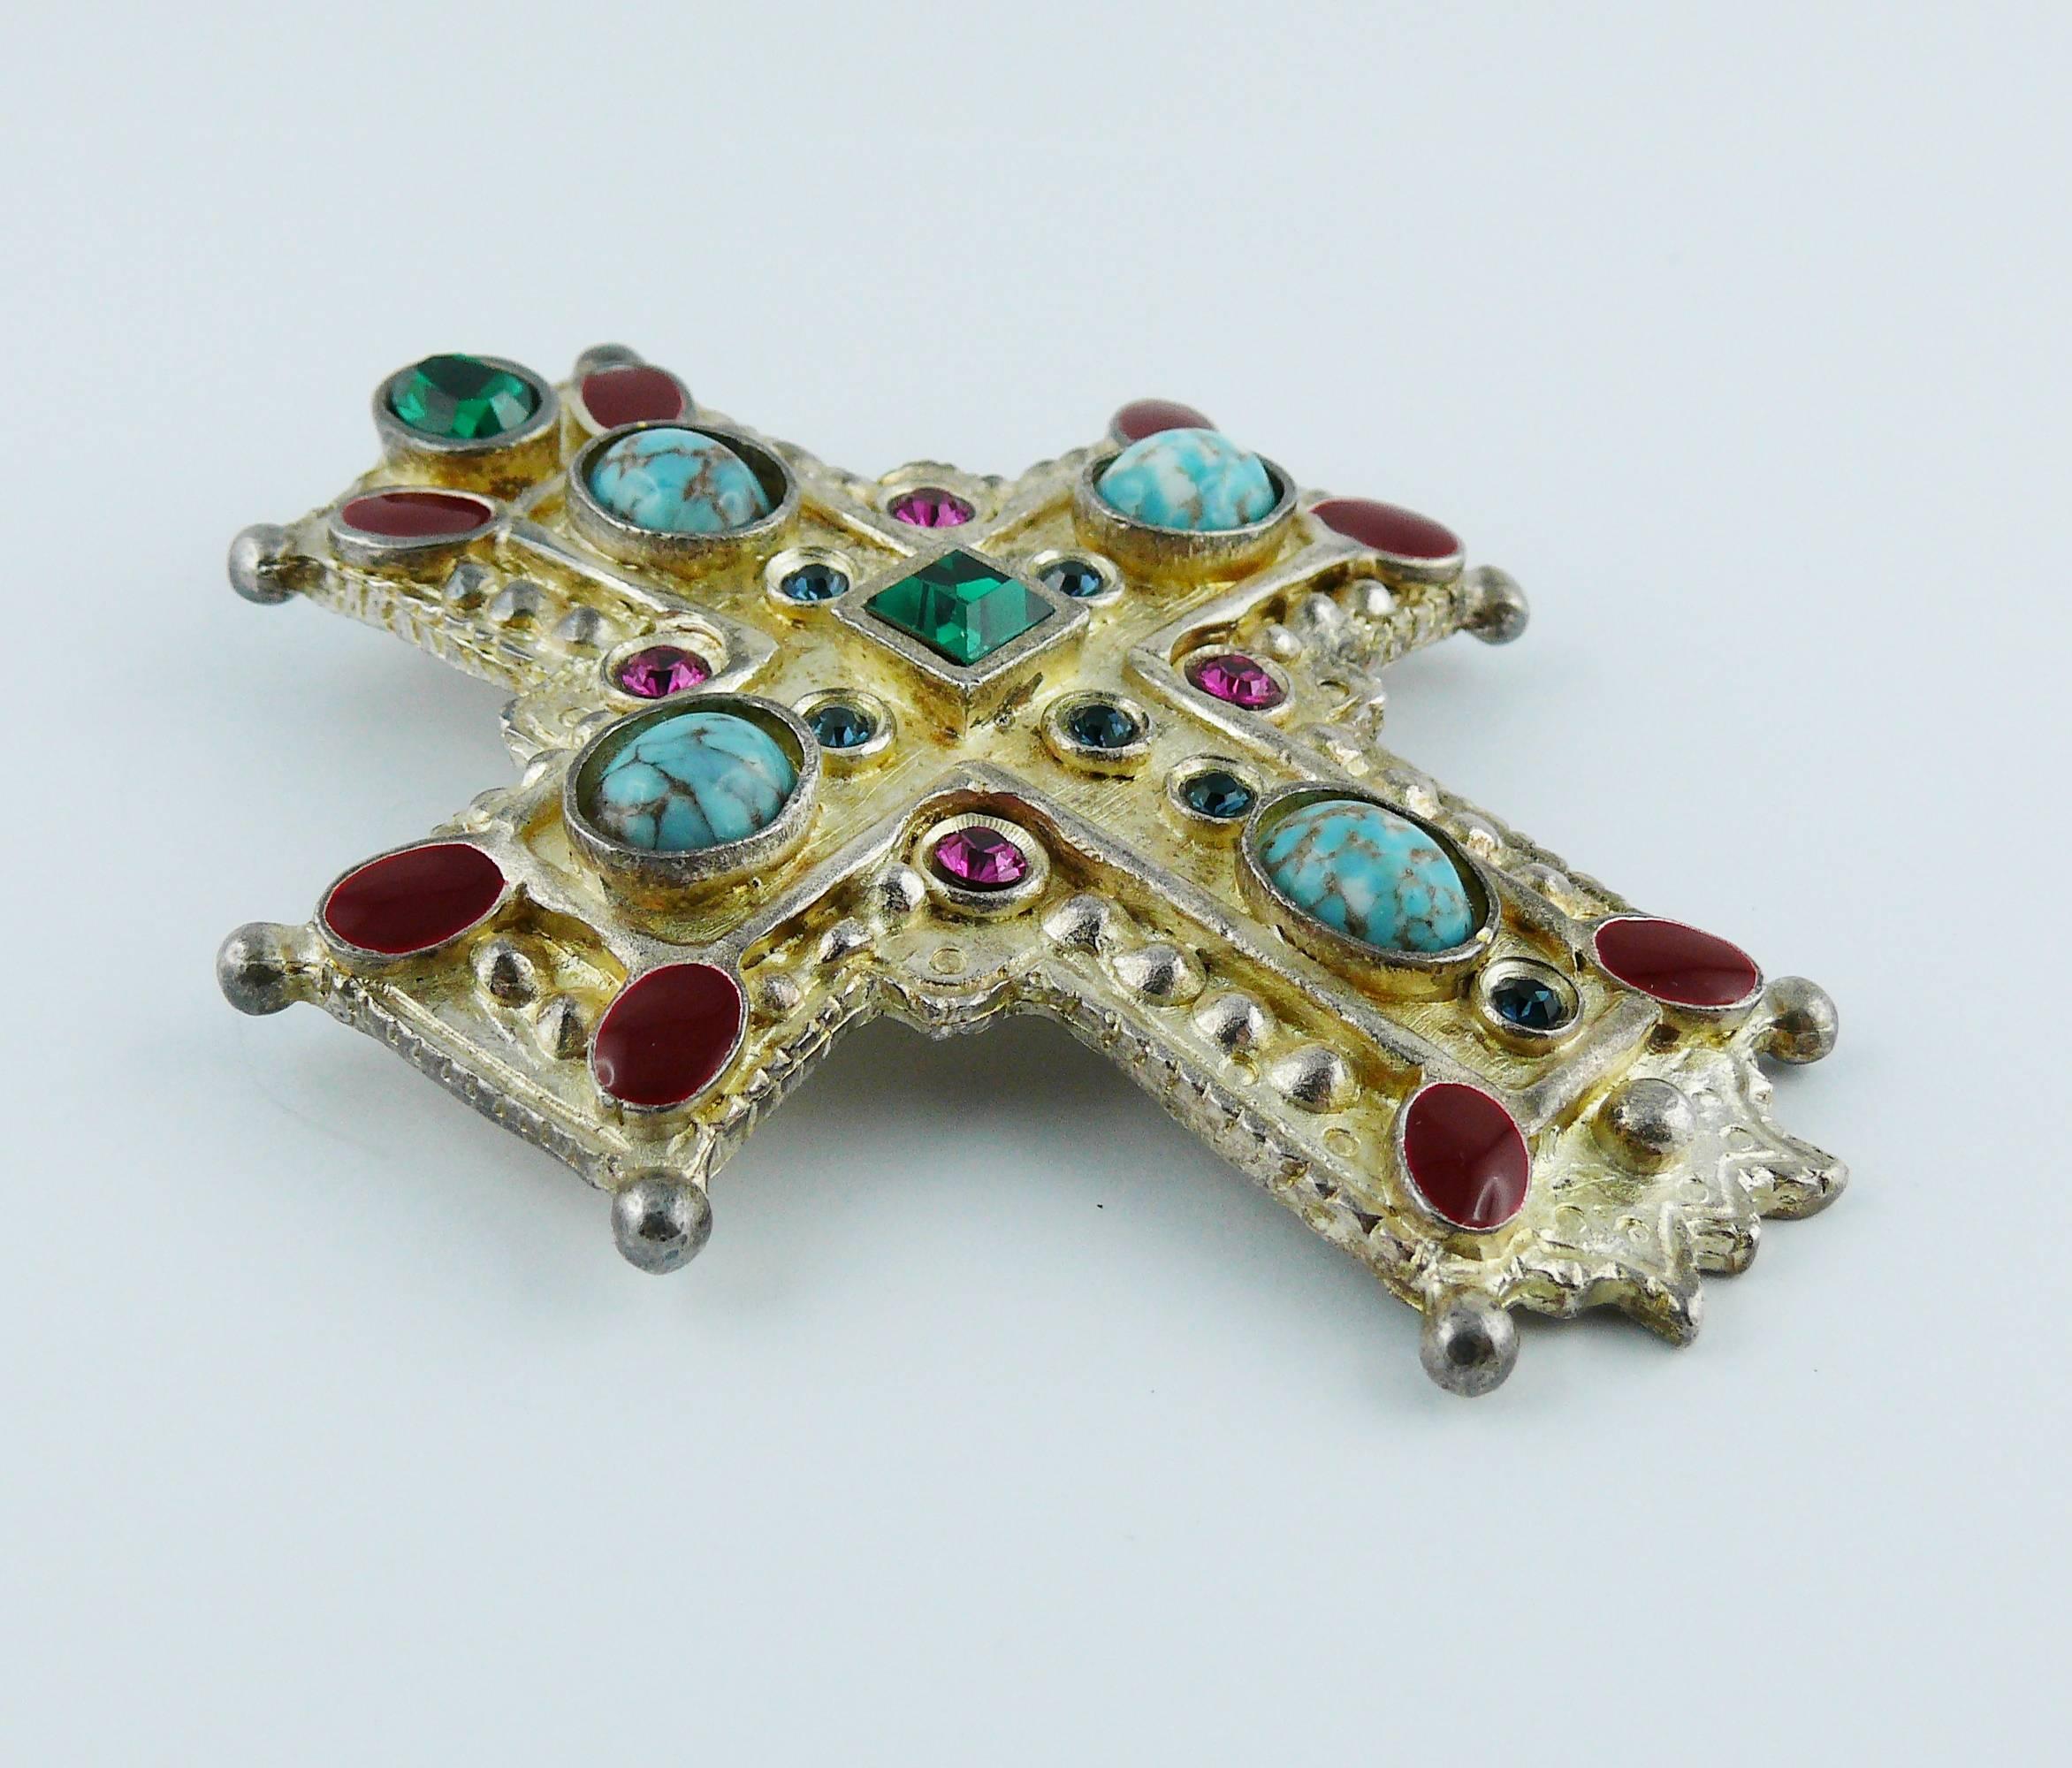 CHRISTIAN LACROIX vintage rare massive jewelled Medieval inspired iconic cross brooch pendant.

Detailed antiqued silver tone metal embellished with multicolored crystals, faux turquoise stones and red enamel.

Can be worn as a brooch or a